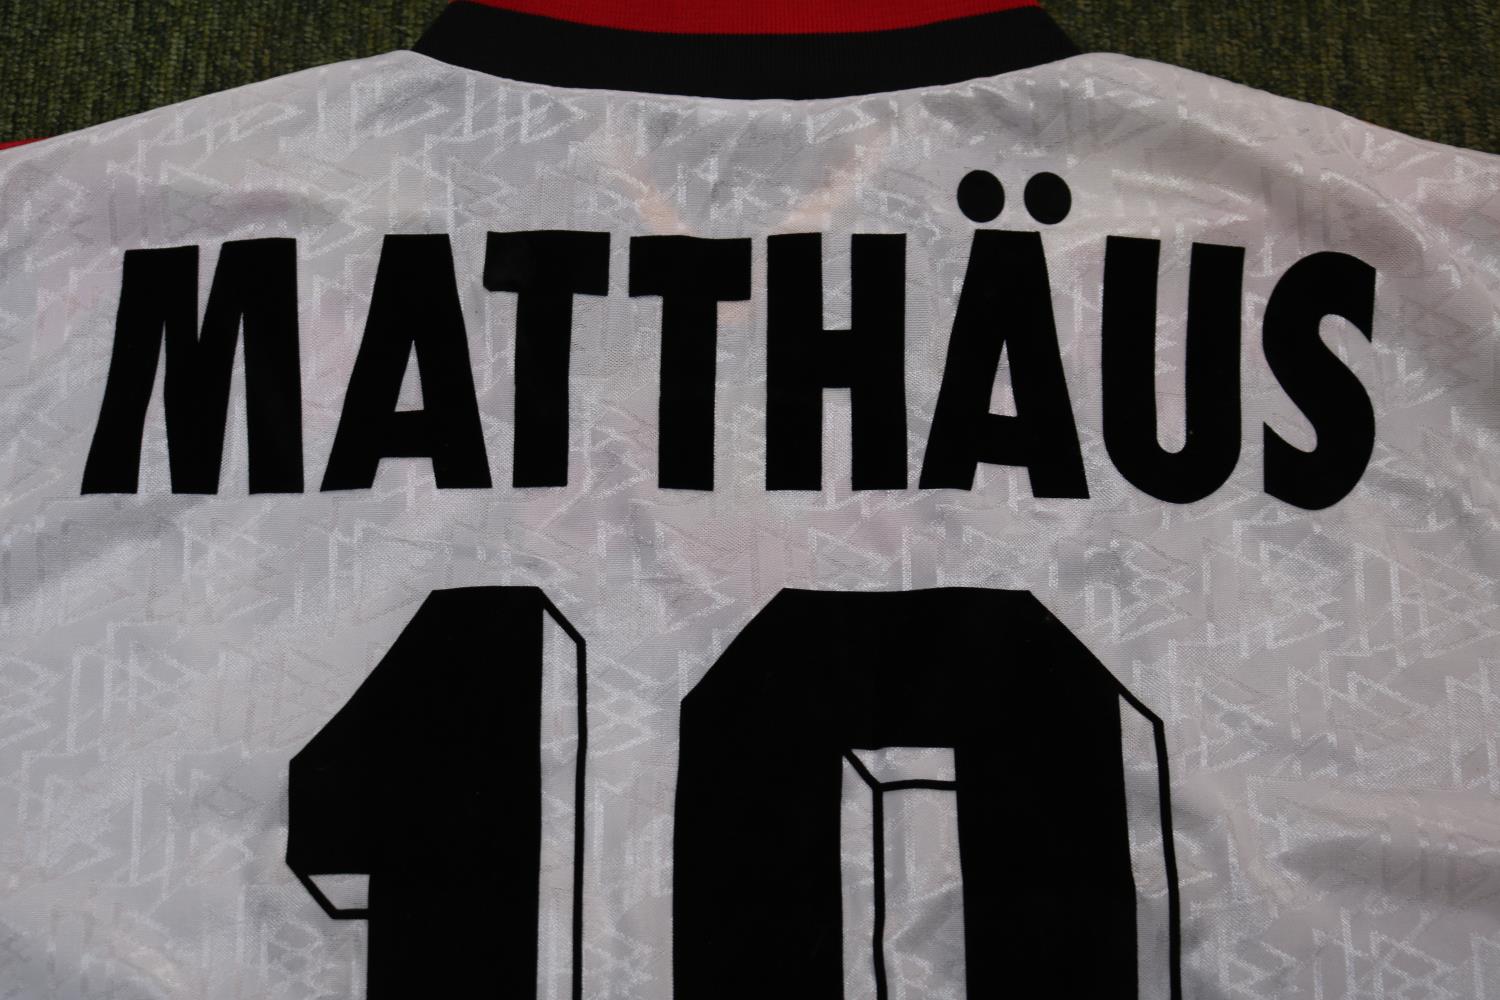 LOTHAR MATTHAUS 1994 FIFA WORLD CUP MATCH WORN #10 GERMANY JERSEY The white short-sleeved jersey was - Image 7 of 7